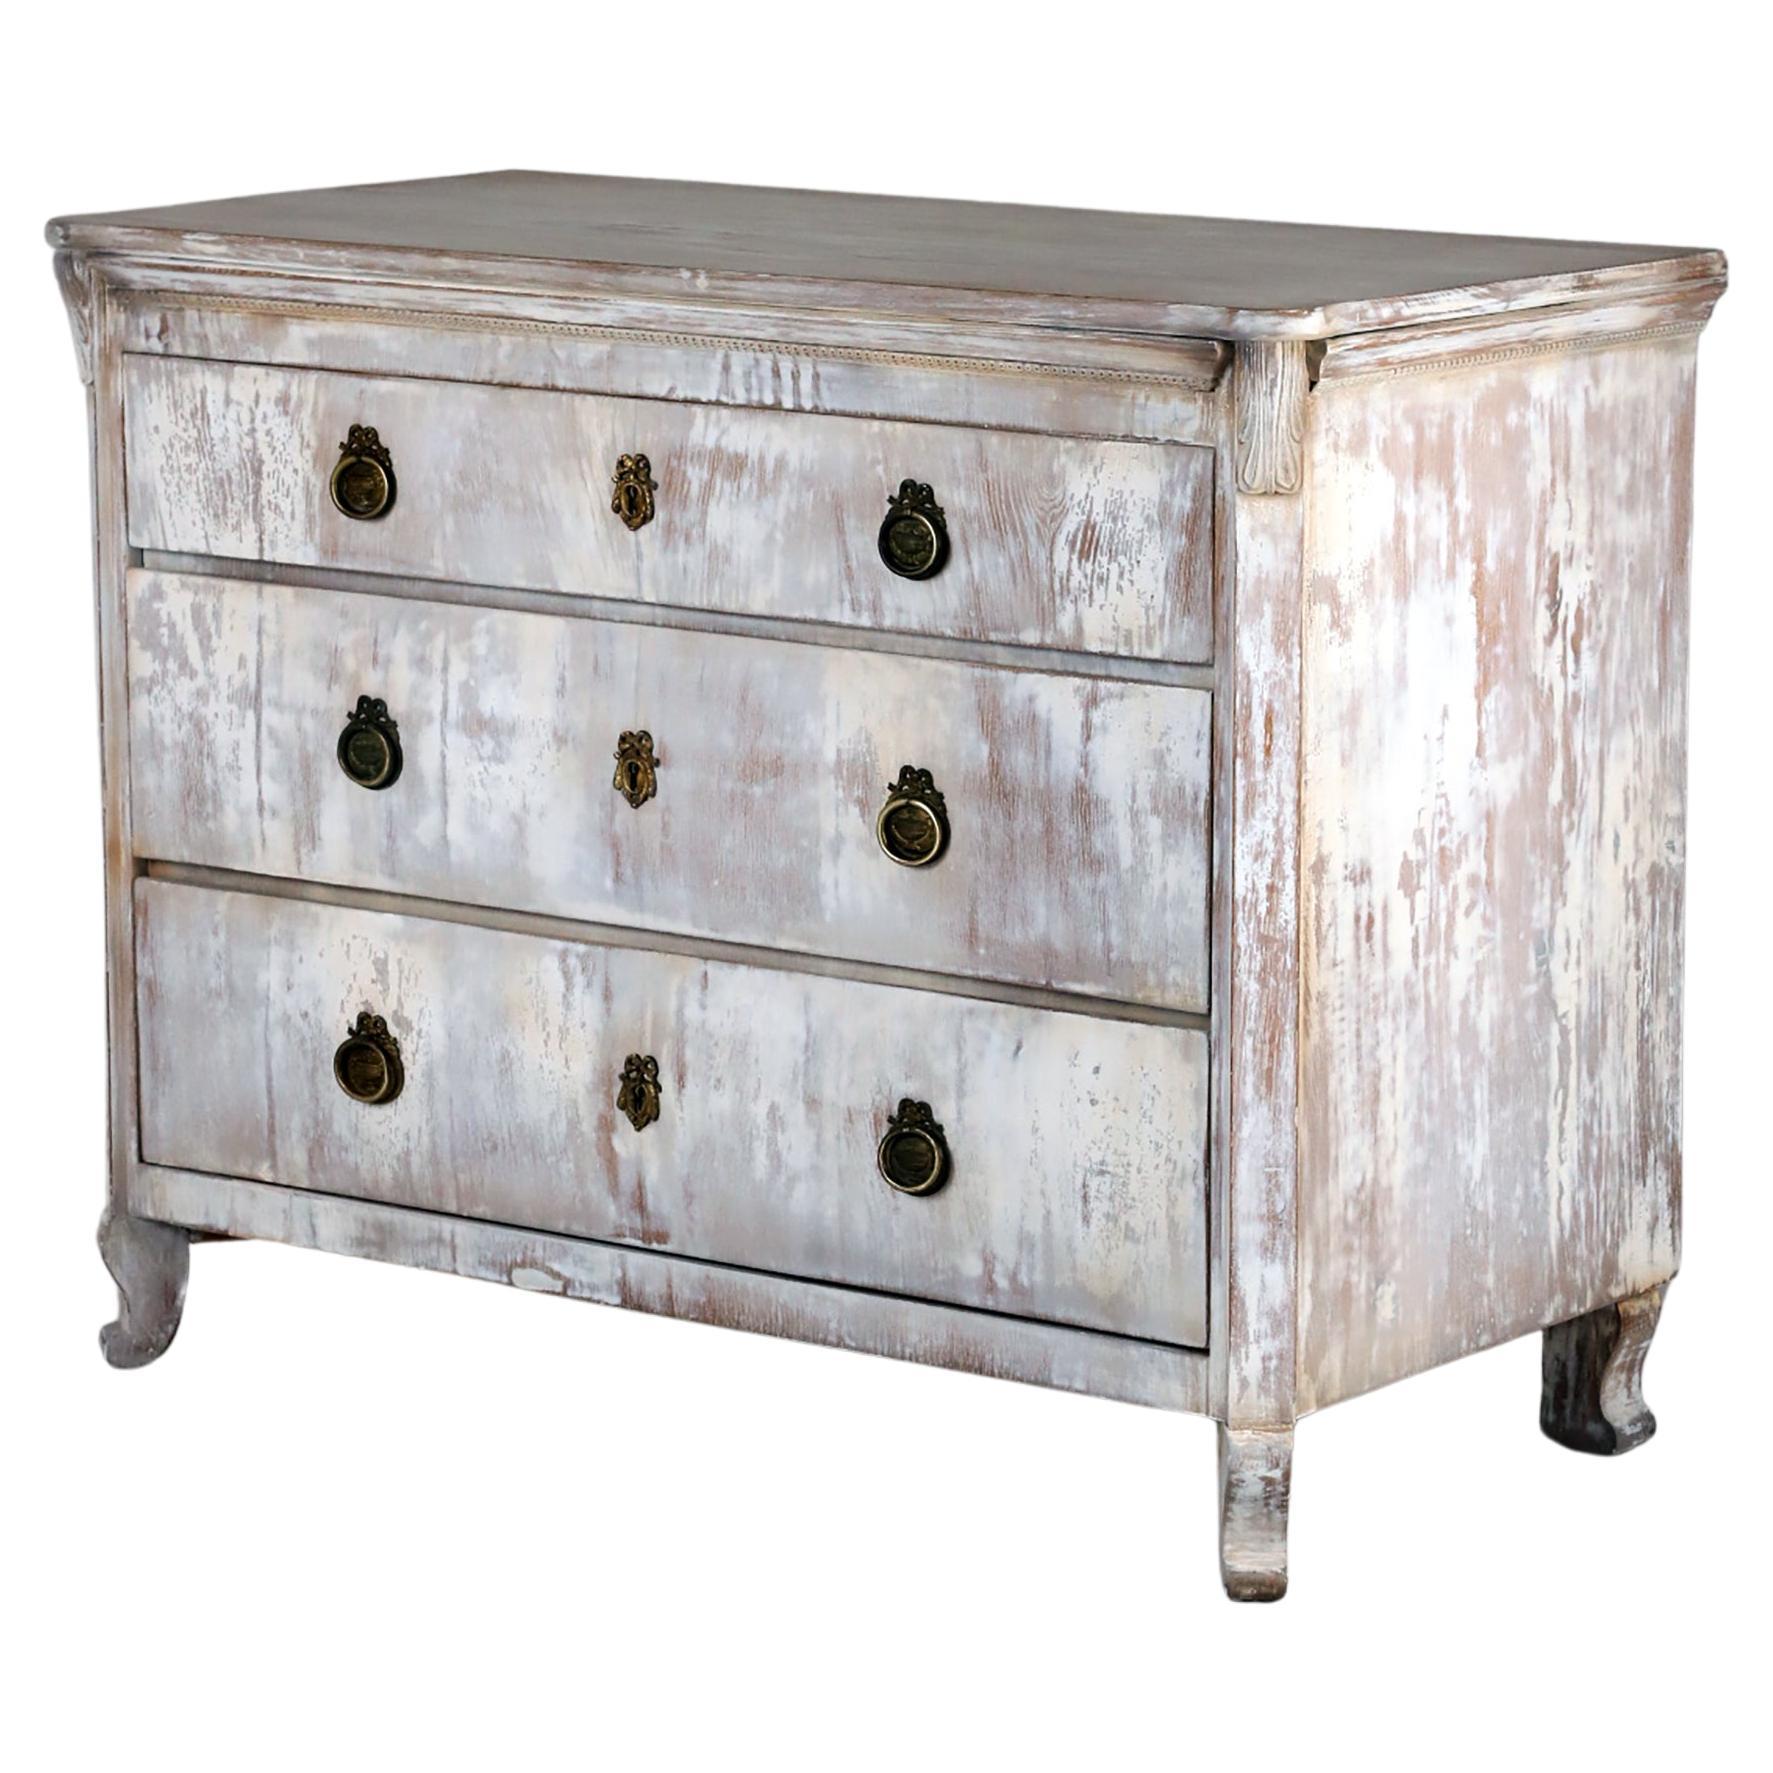 19th Century Gustavian Style Chest of Drawers, 
Germany, 1850
Ashwood

A decorative Swedish Gustavian style chest of drawers made of solid ashwood, three drawers with brass hardware. Three locks with three keys. 
Nice form with decorative ornaments